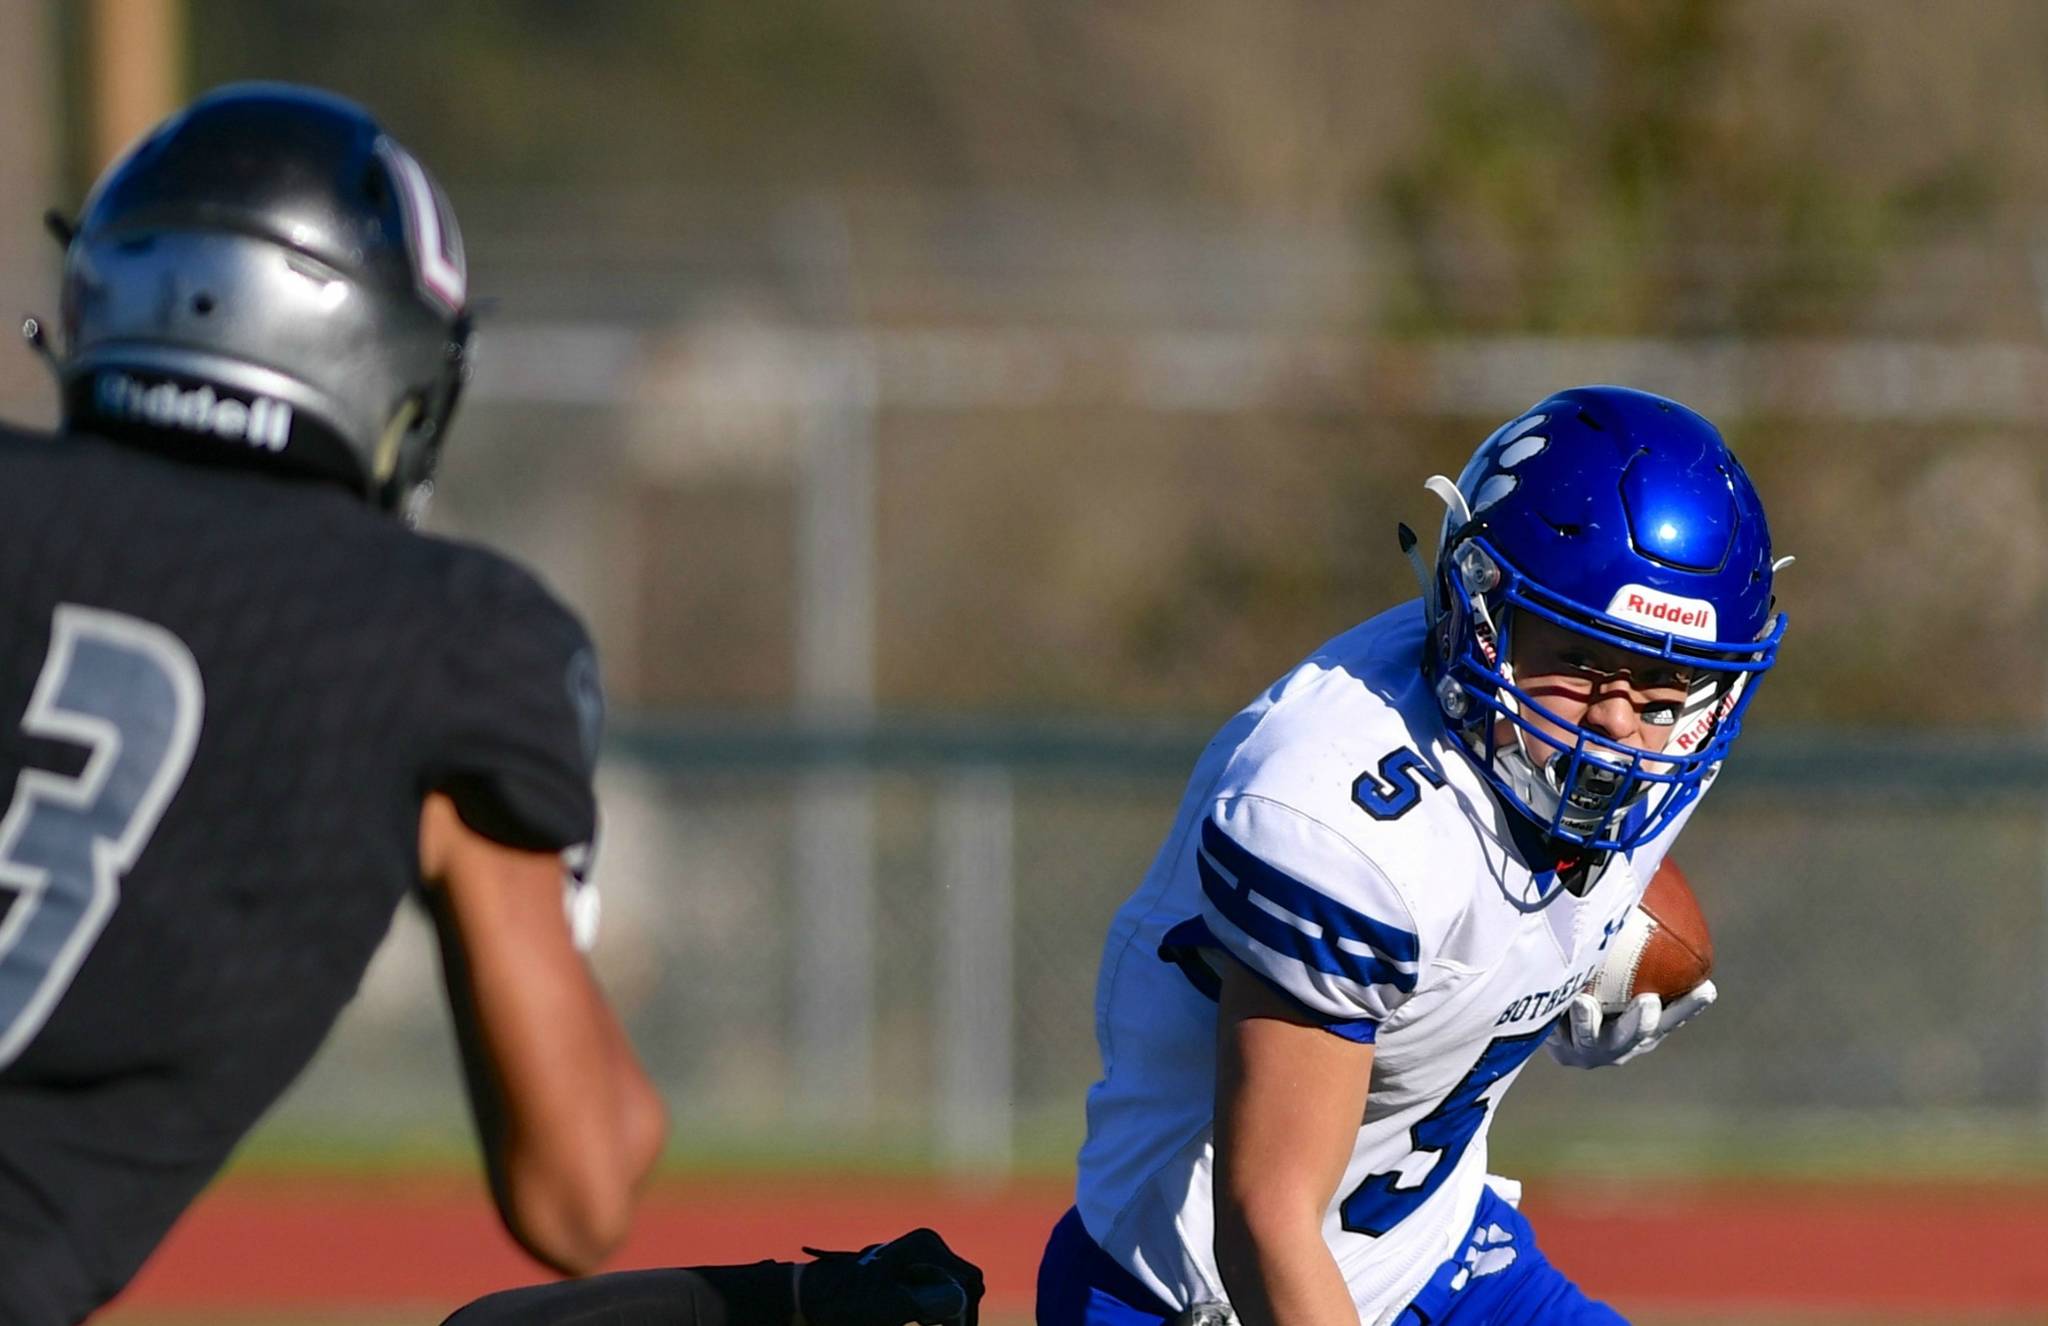 Bothell and Kenmore football players earn all-league honors